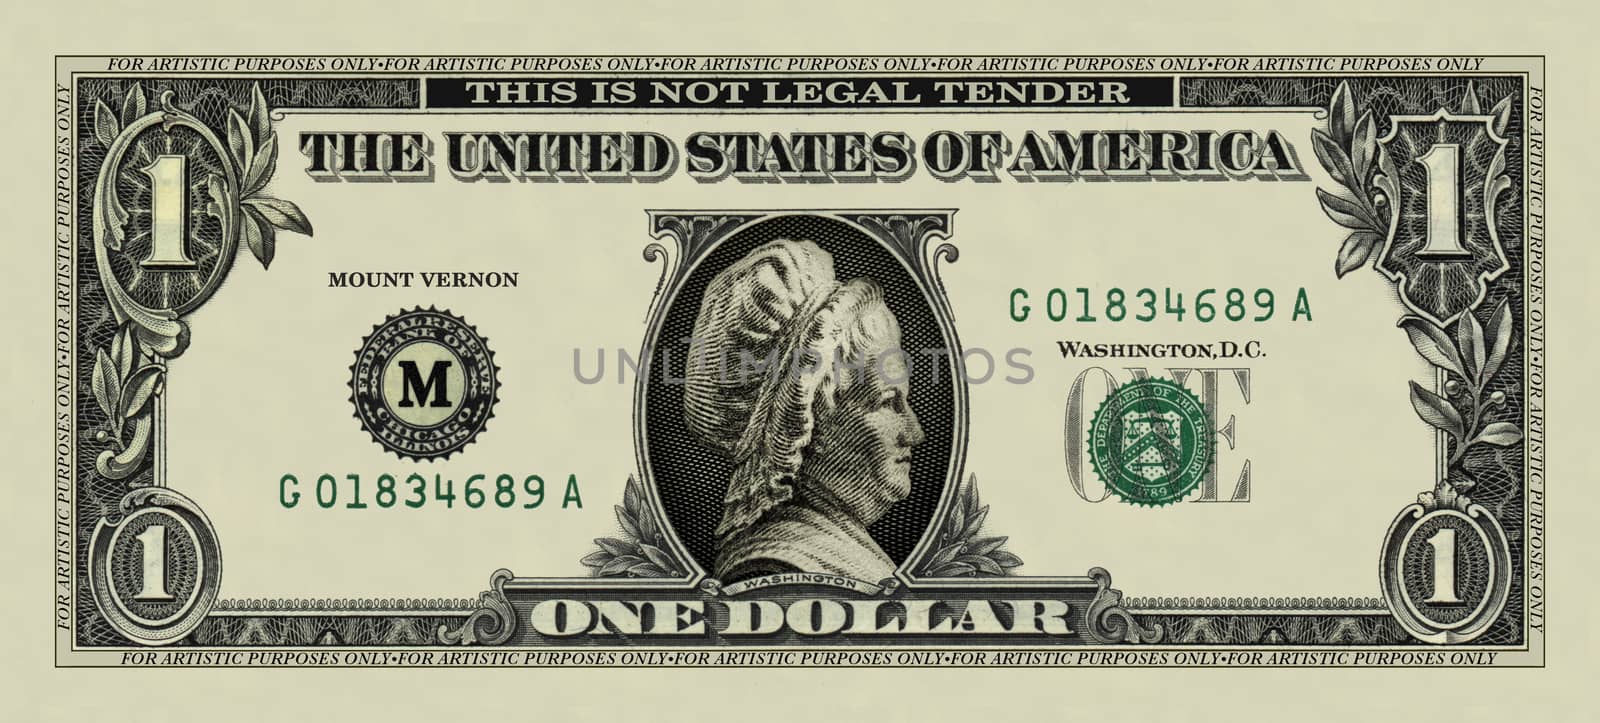 Photo illustration of a dollar bill substituted with Martha Washington's portrait, pulled from my photo of a United States postage stamp (circa 1938).